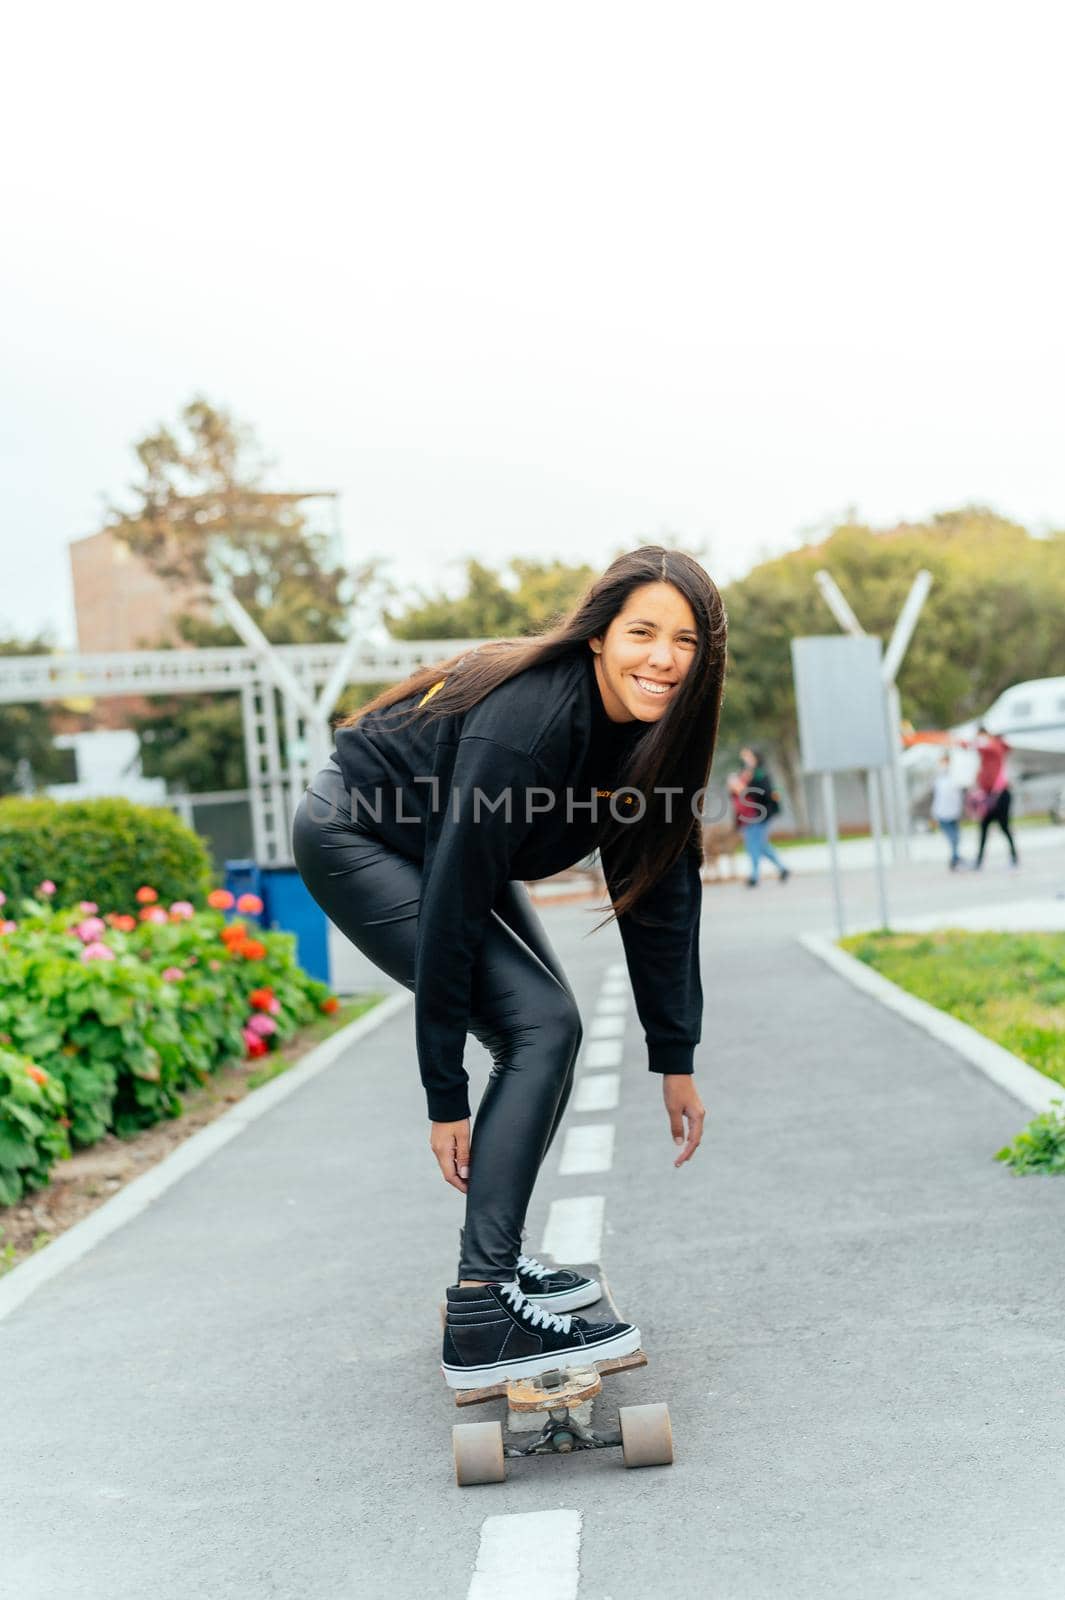 Young girl on longboard smiling. Outdoors, lifestyle. by Peruphotoart